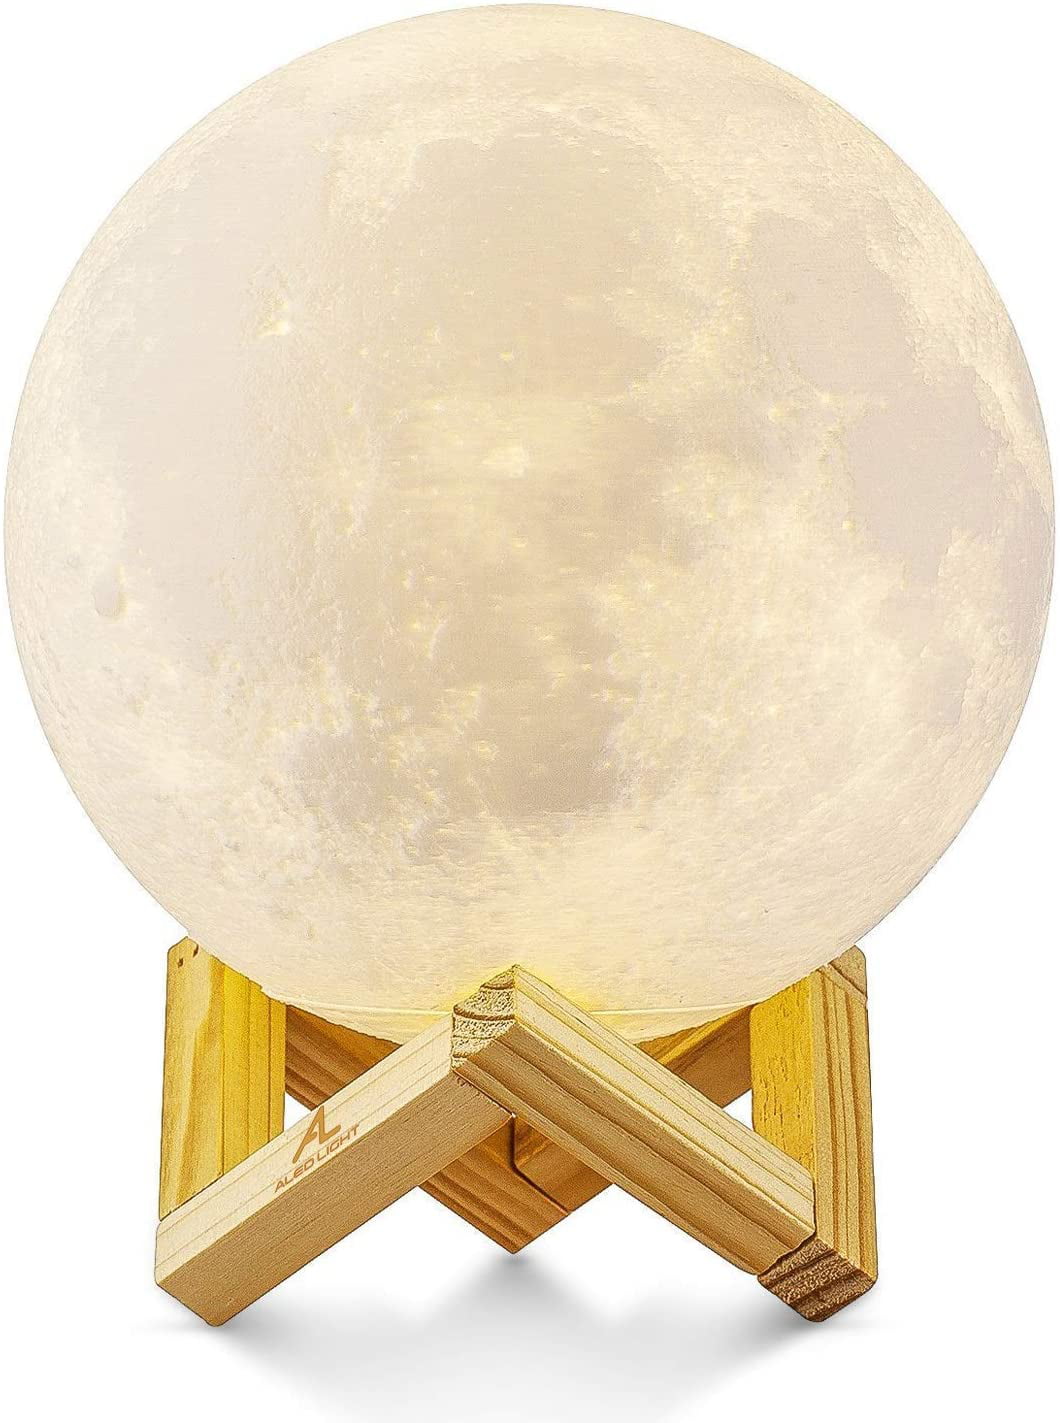 Rechargeable Moon Lamp Night Light Kids Dimmable LED Color Change 3D Dimmable UK 